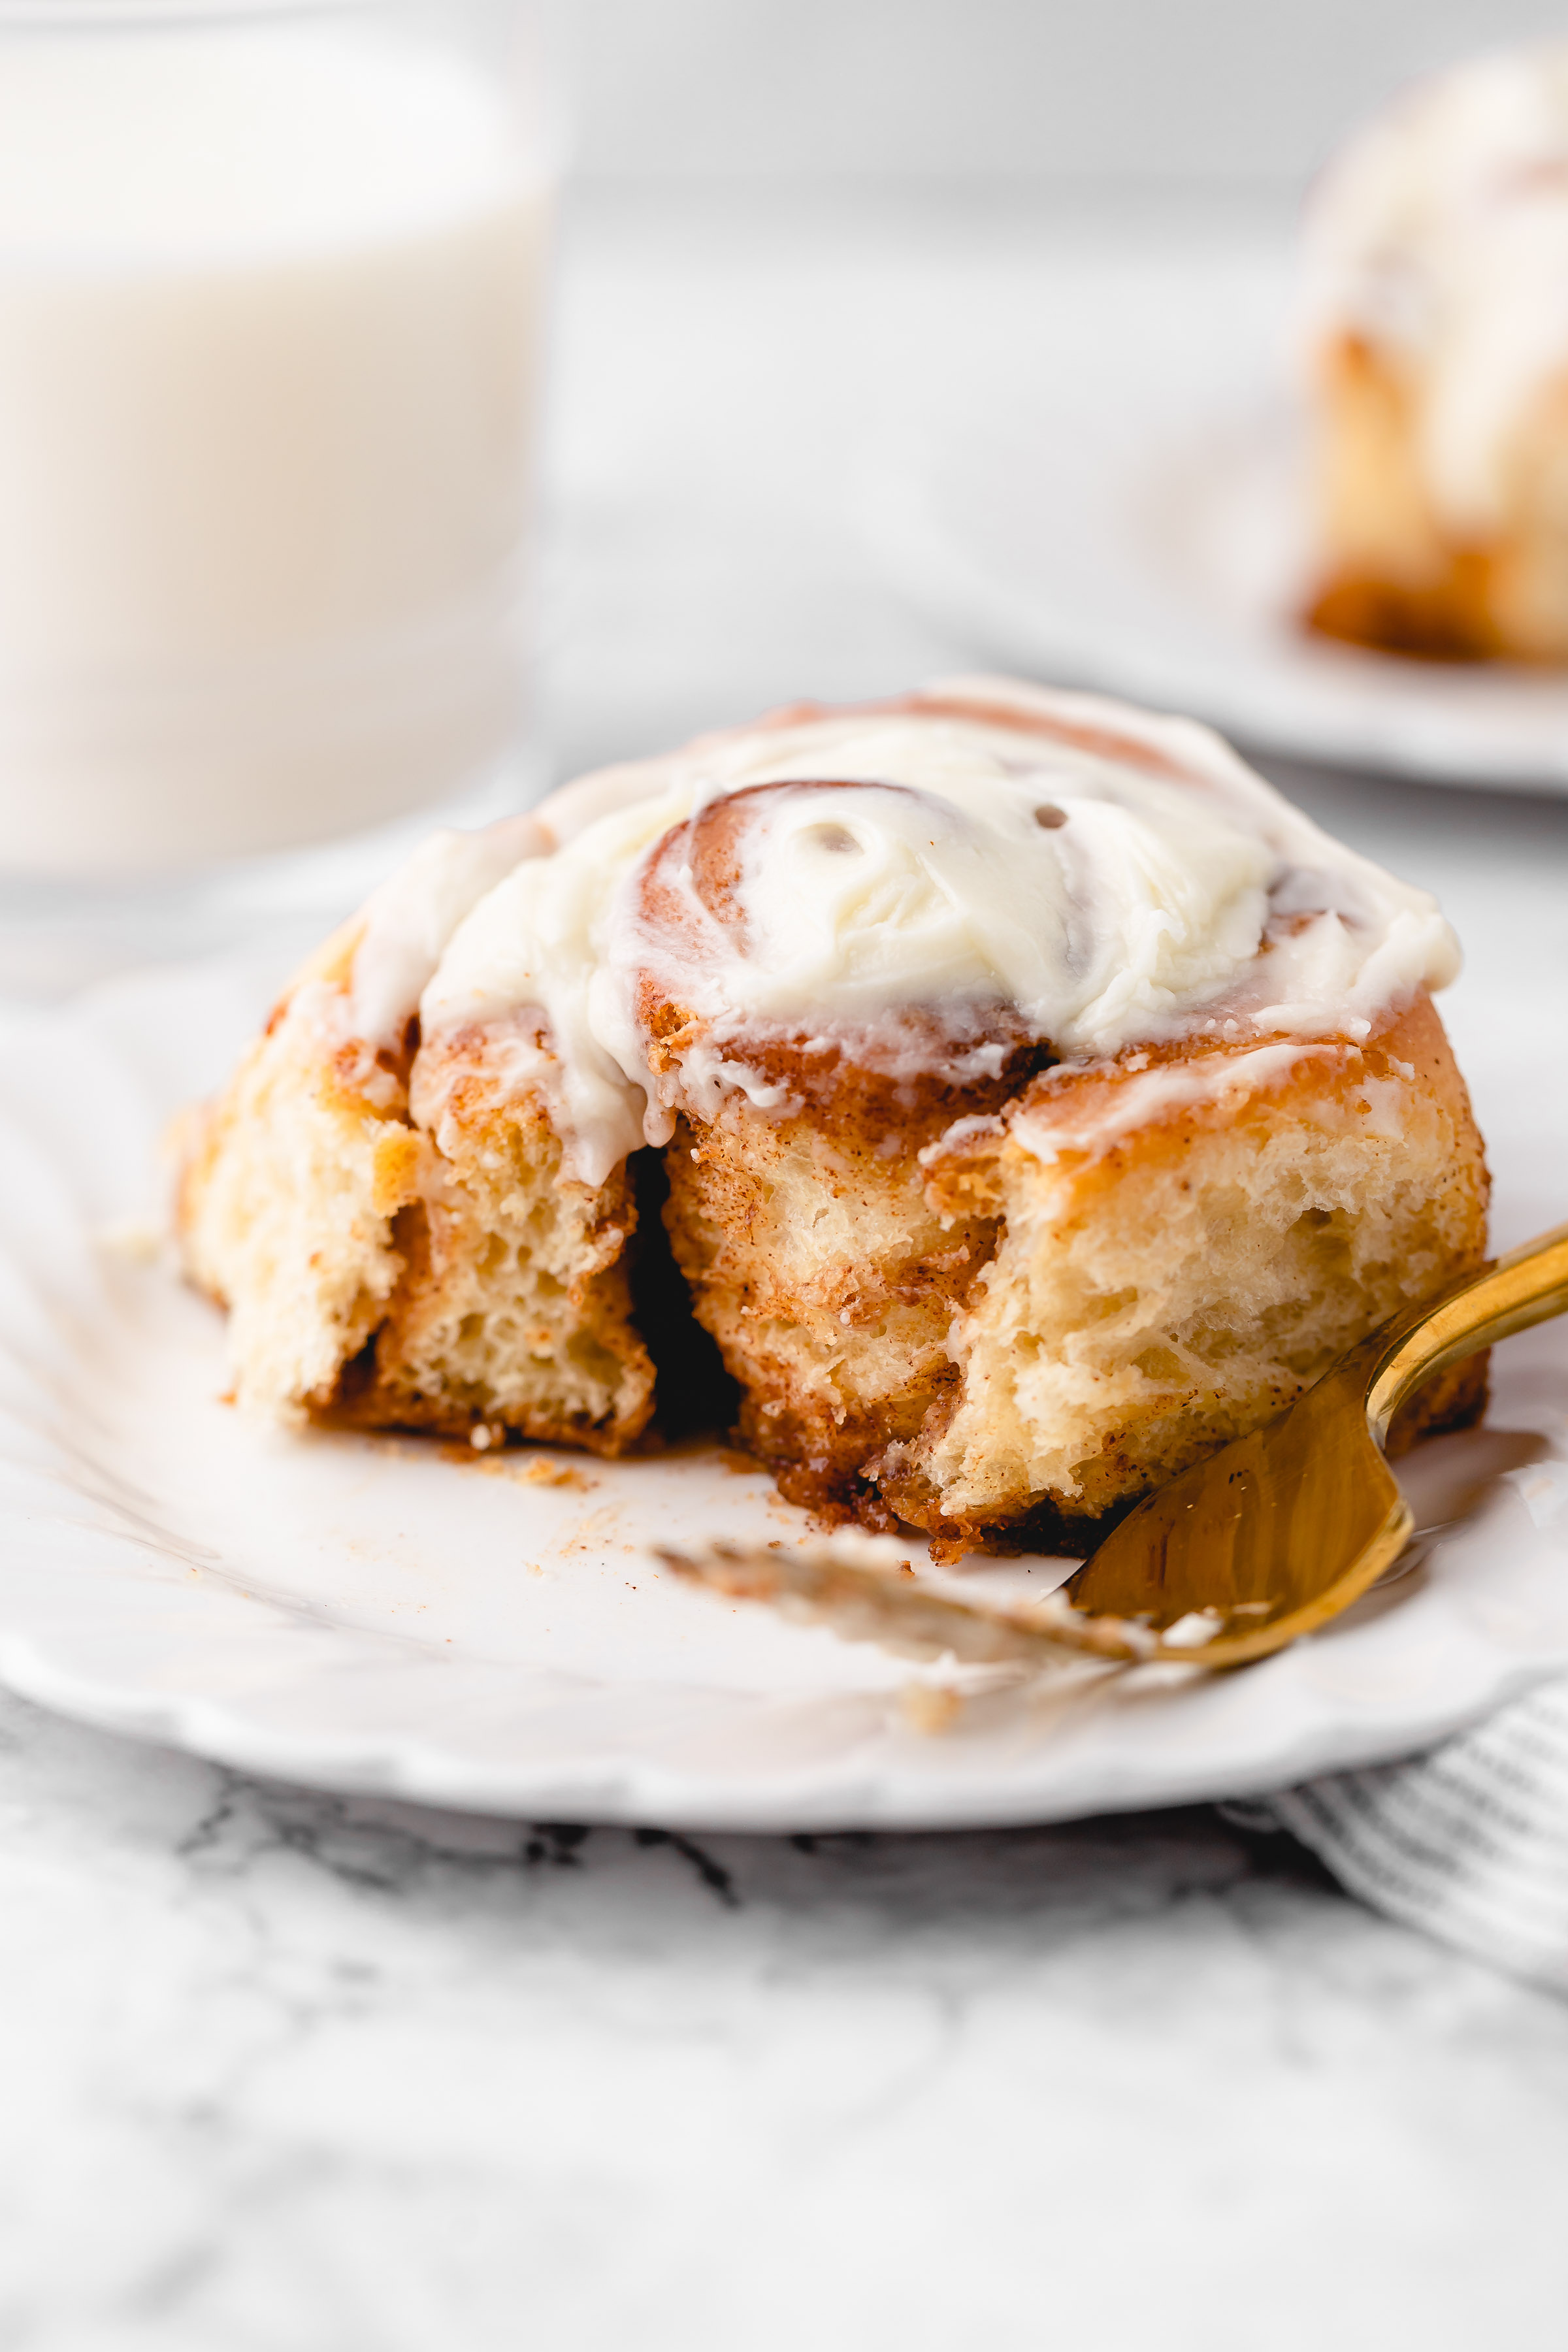 Vegan cinnamon roll on plate with corner torn off to show inside